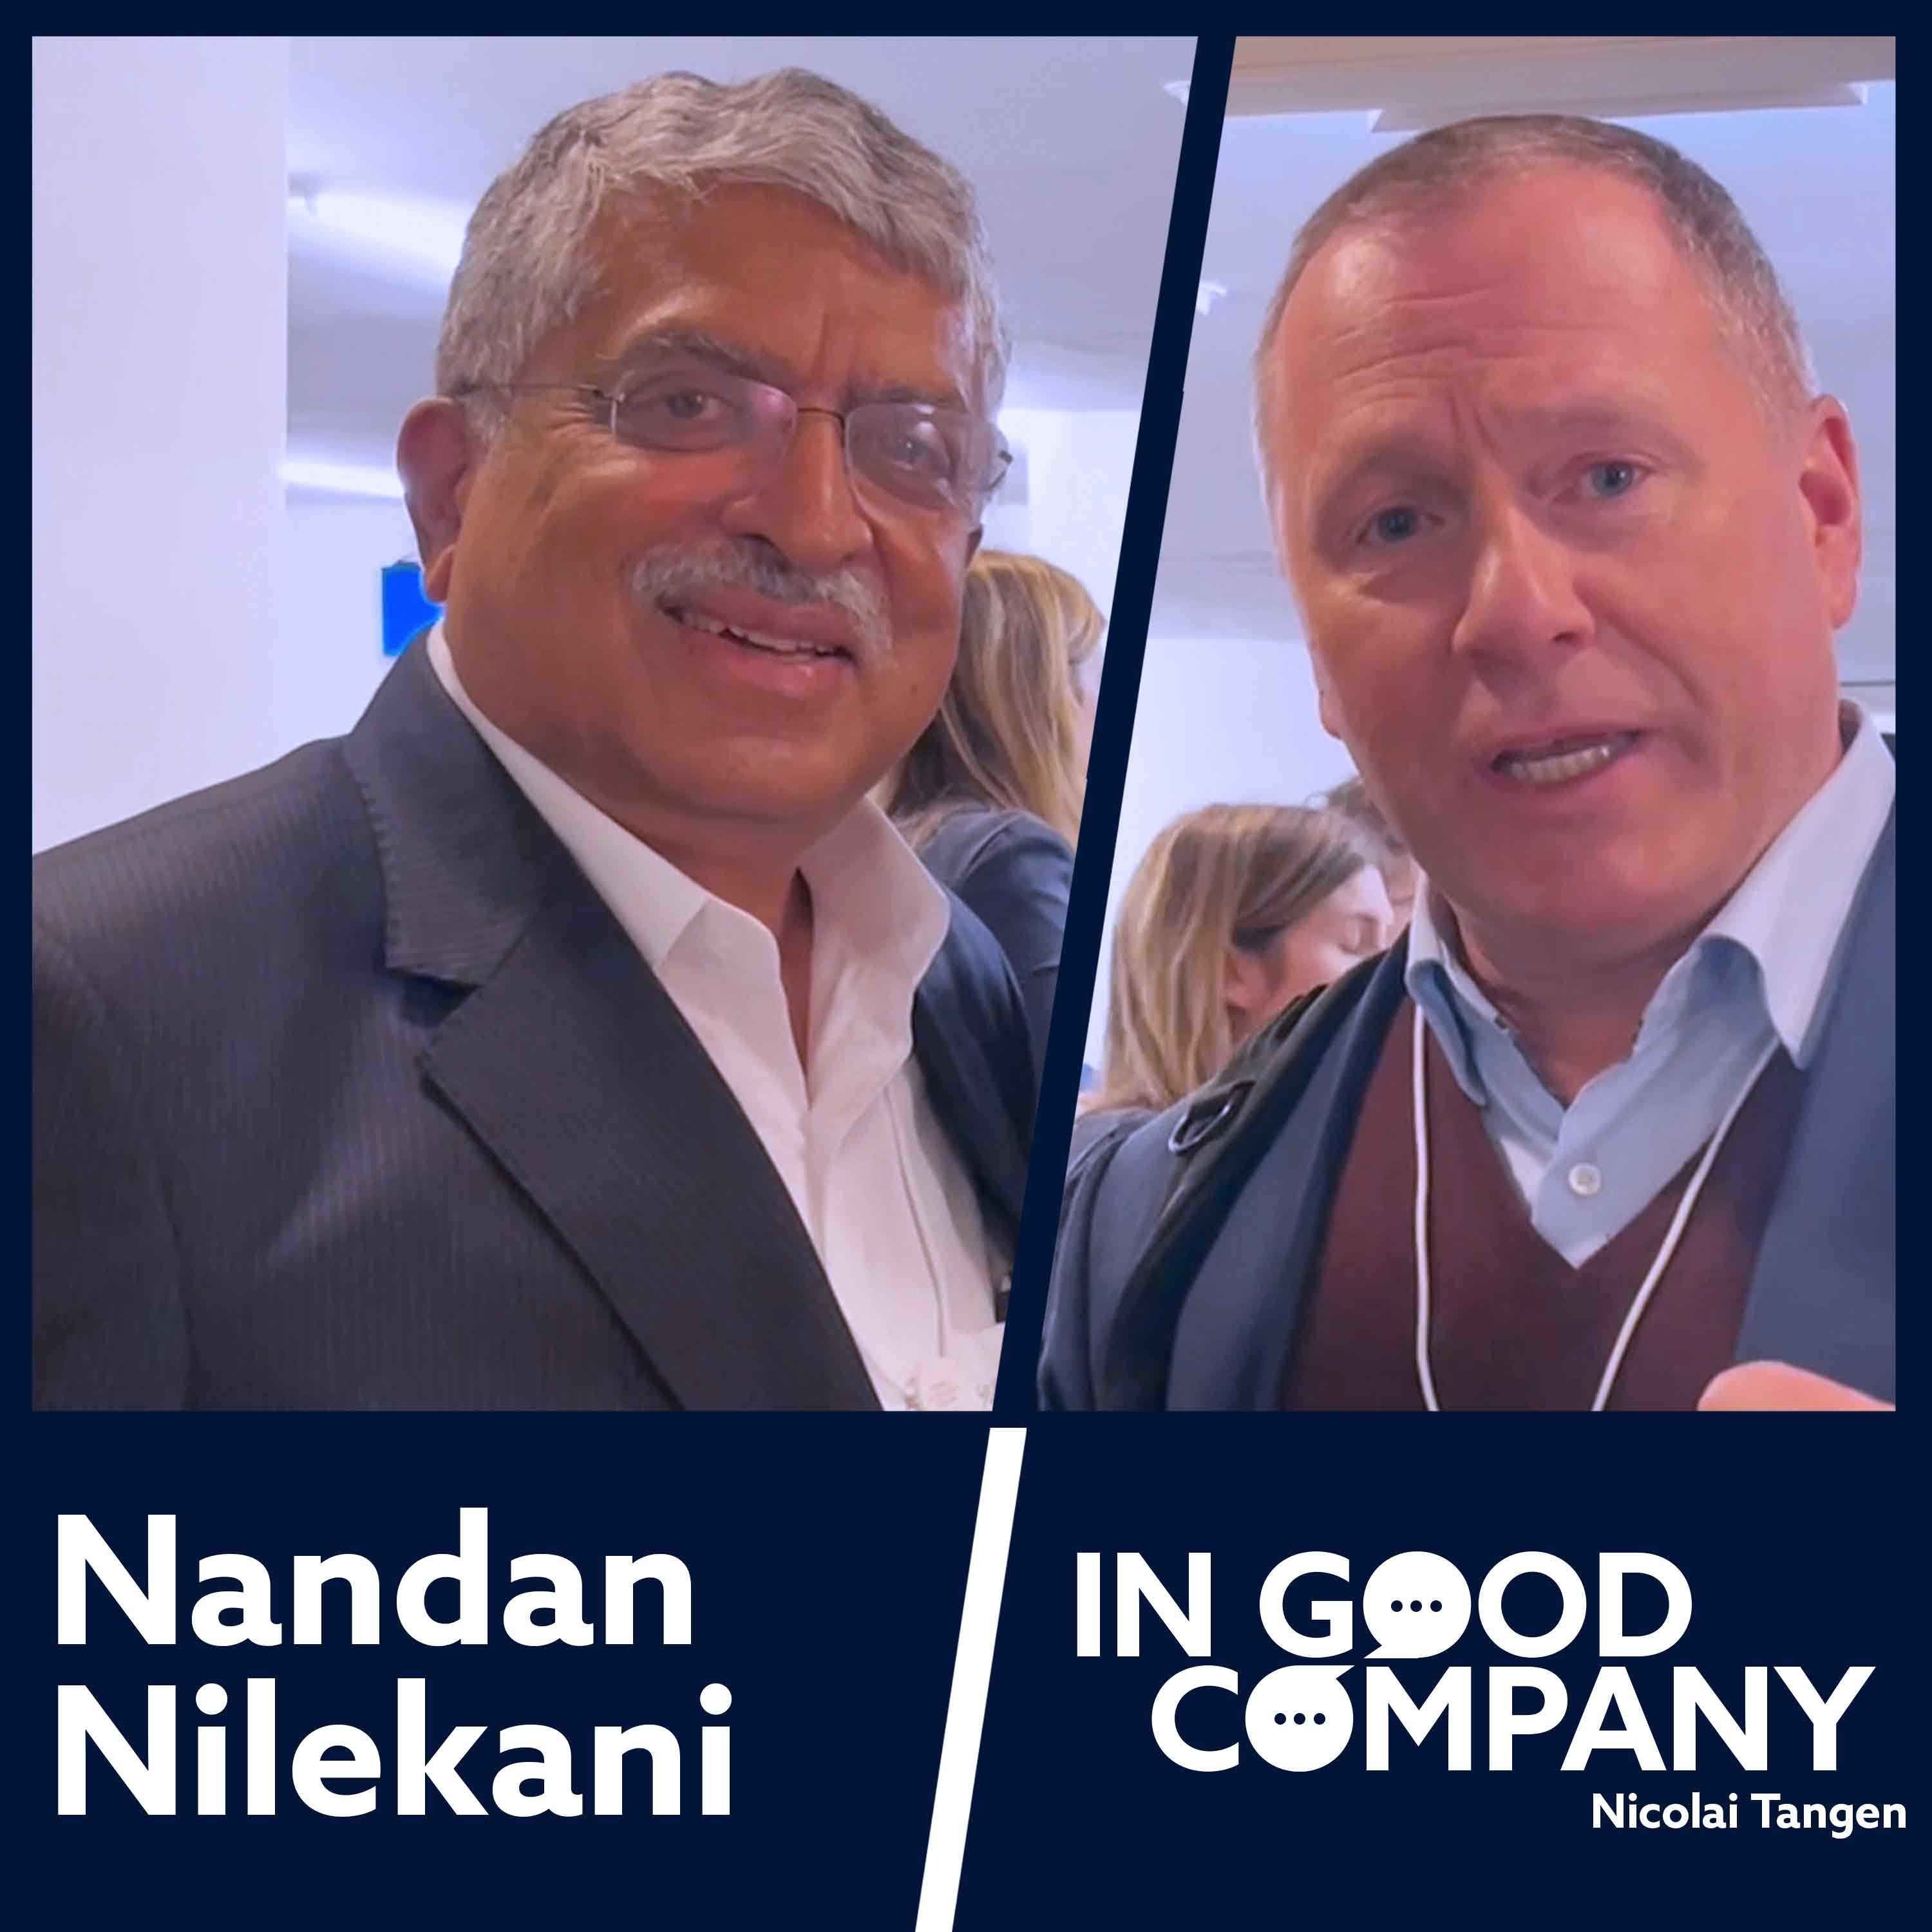  Nandan Nilekani Co-founder and Chairman of Infosys by Norges Bank Investment Management